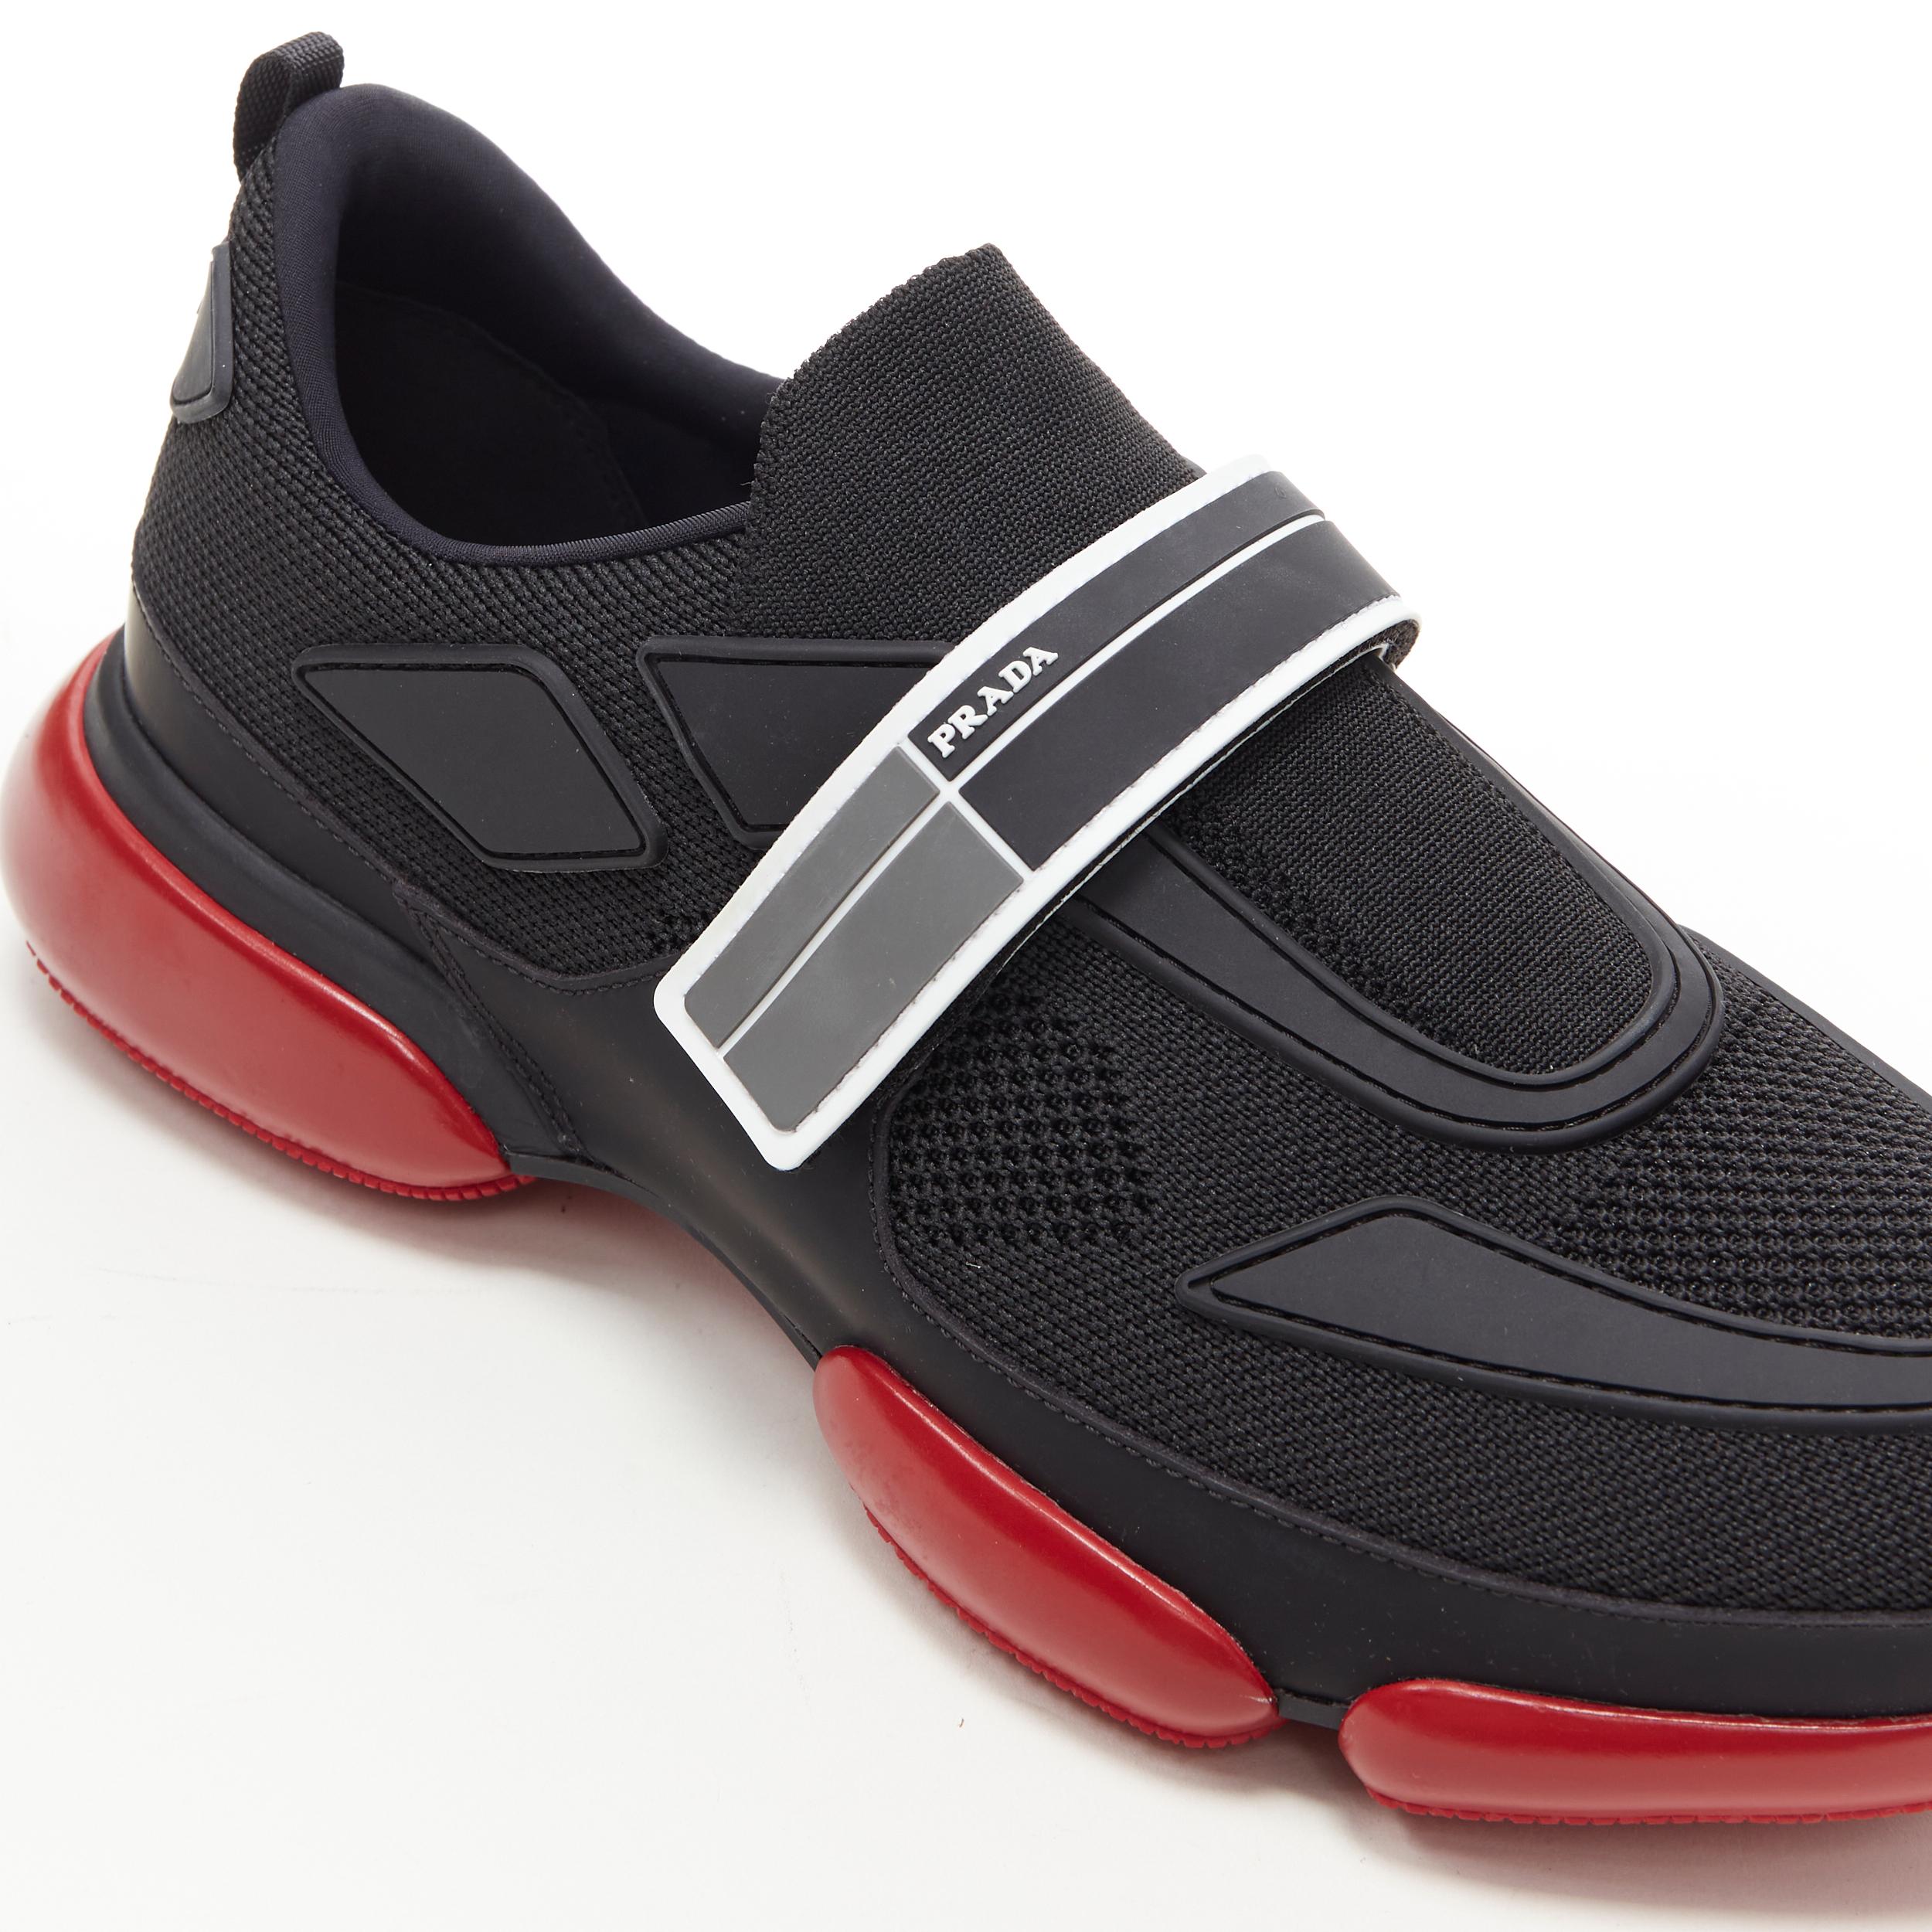 new PRADA Cloudbust black red logo rubber strapped low top sneakers UK7 ...